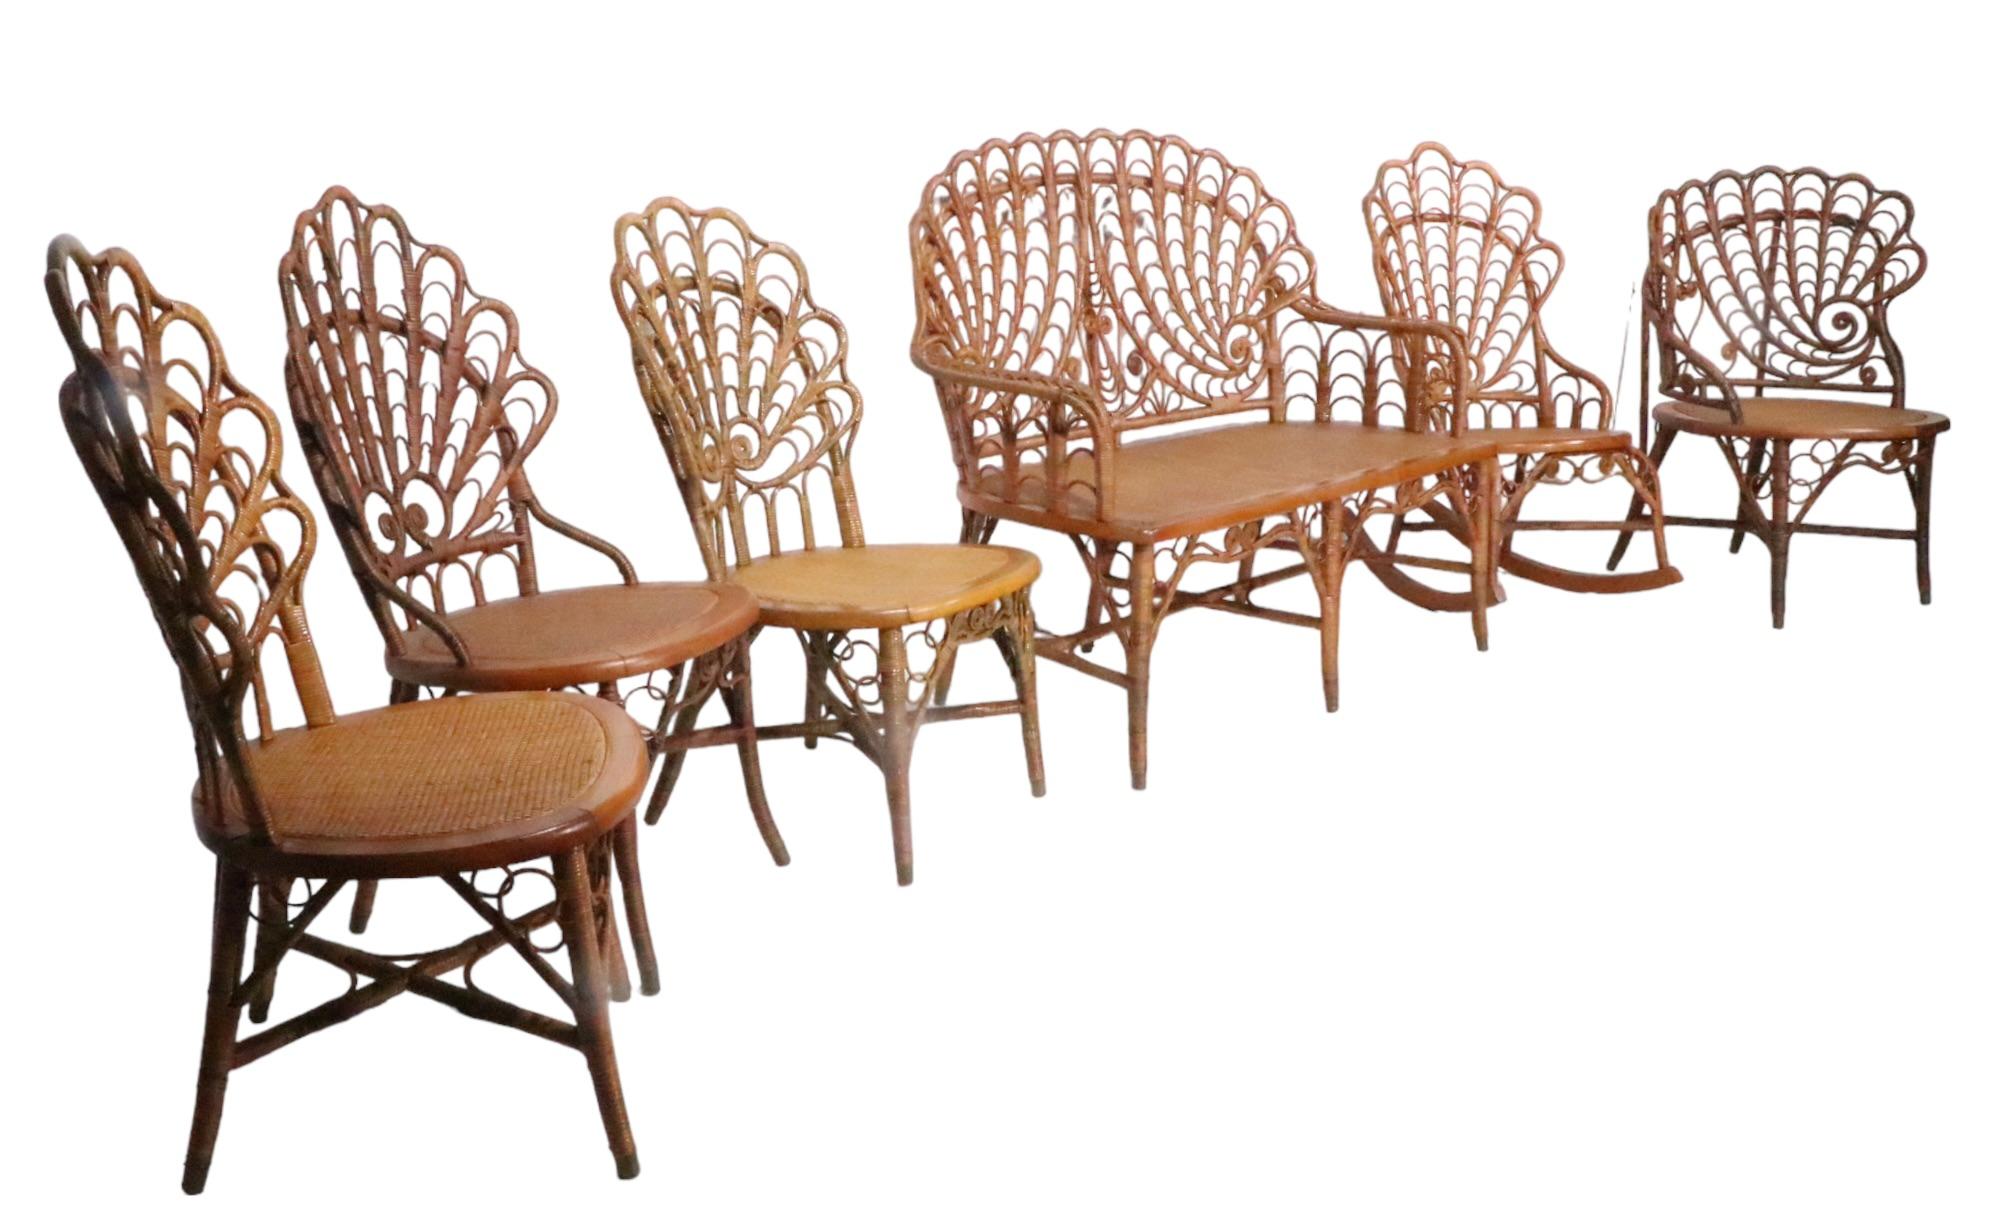 19th Century 6 Pc. Set Ornate Antique Wicker by Heywood Brothers c 1890's  For Sale